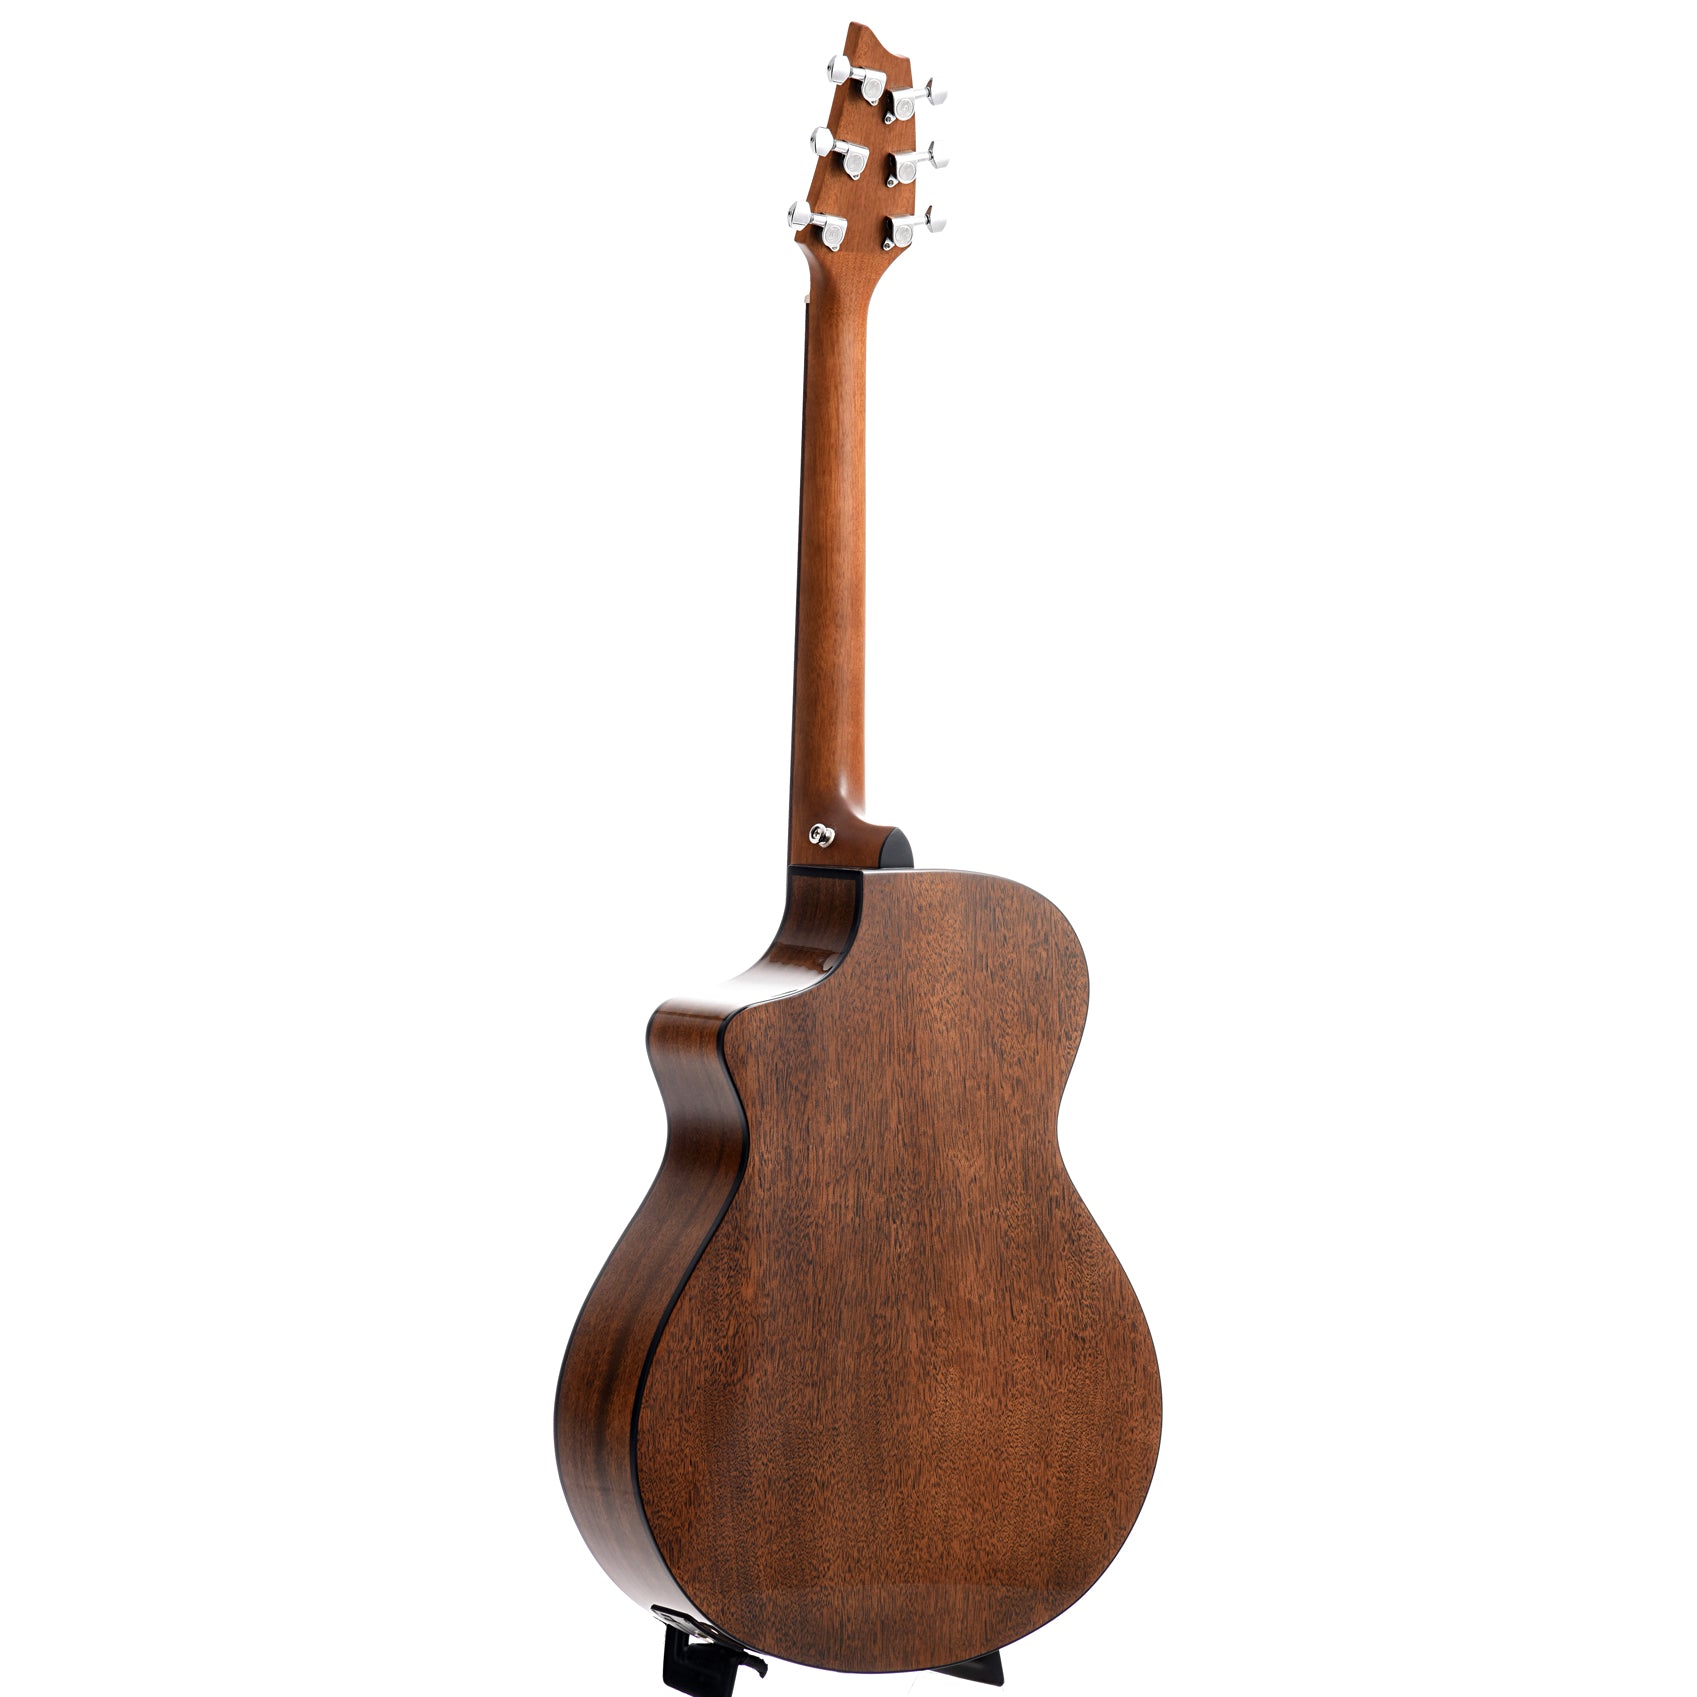 Image 11 of Breedlove Discovery Concert Suede CE Mahogany-Mahogany Acoustic Guitar - SKU# BDSUEDE : Product Type Flat-top Guitars : Elderly Instruments